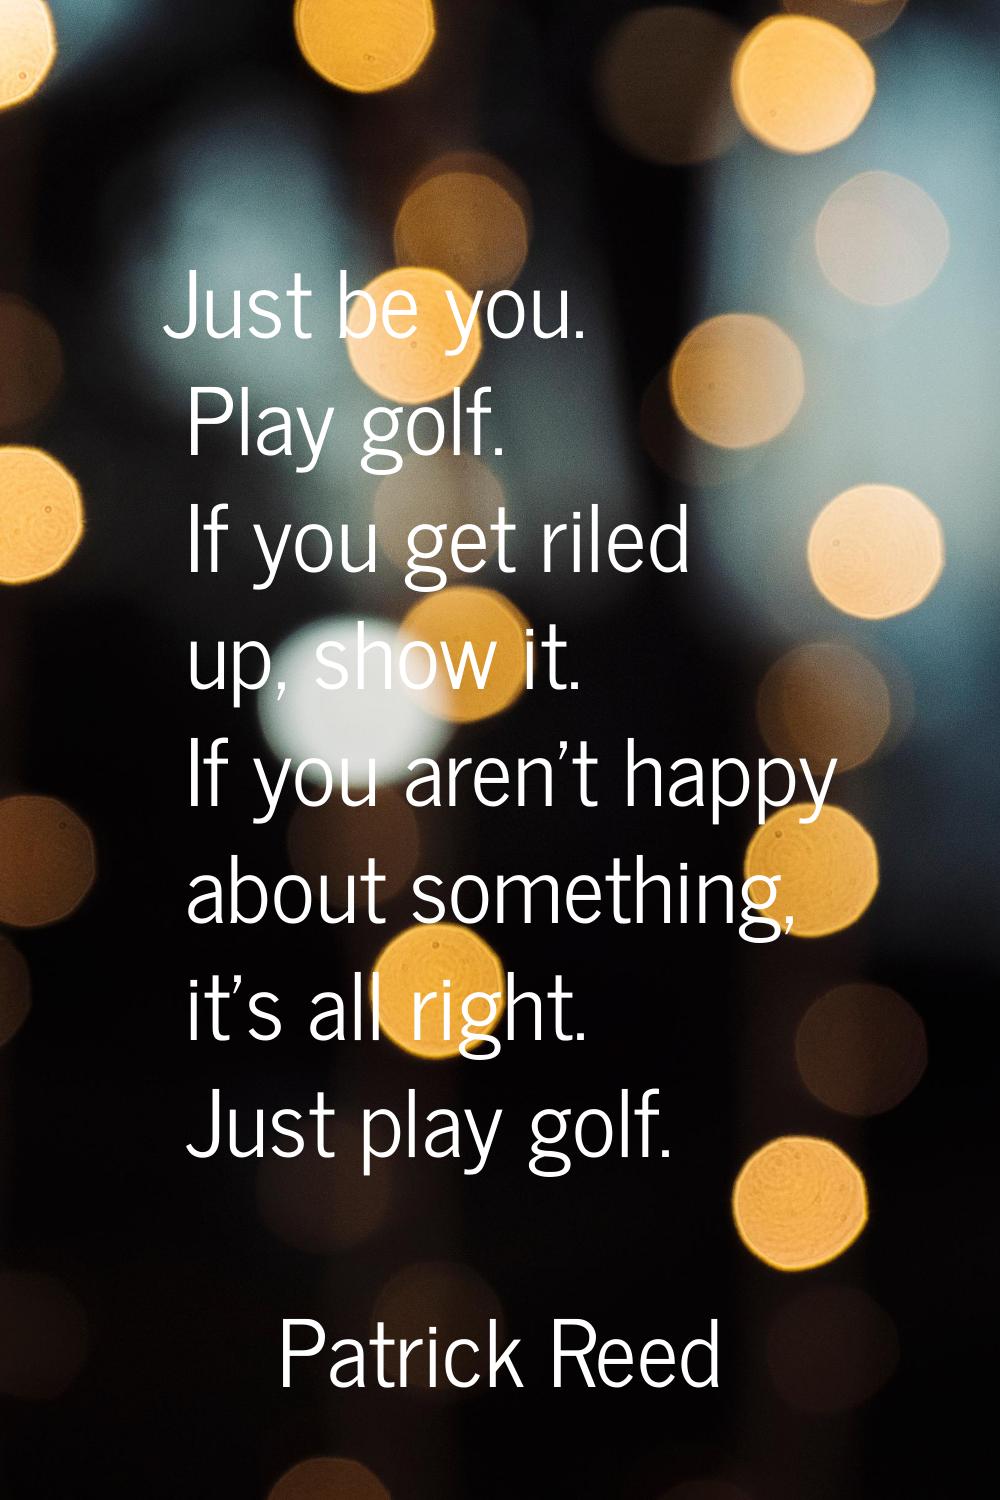 Just be you. Play golf. If you get riled up, show it. If you aren't happy about something, it's all